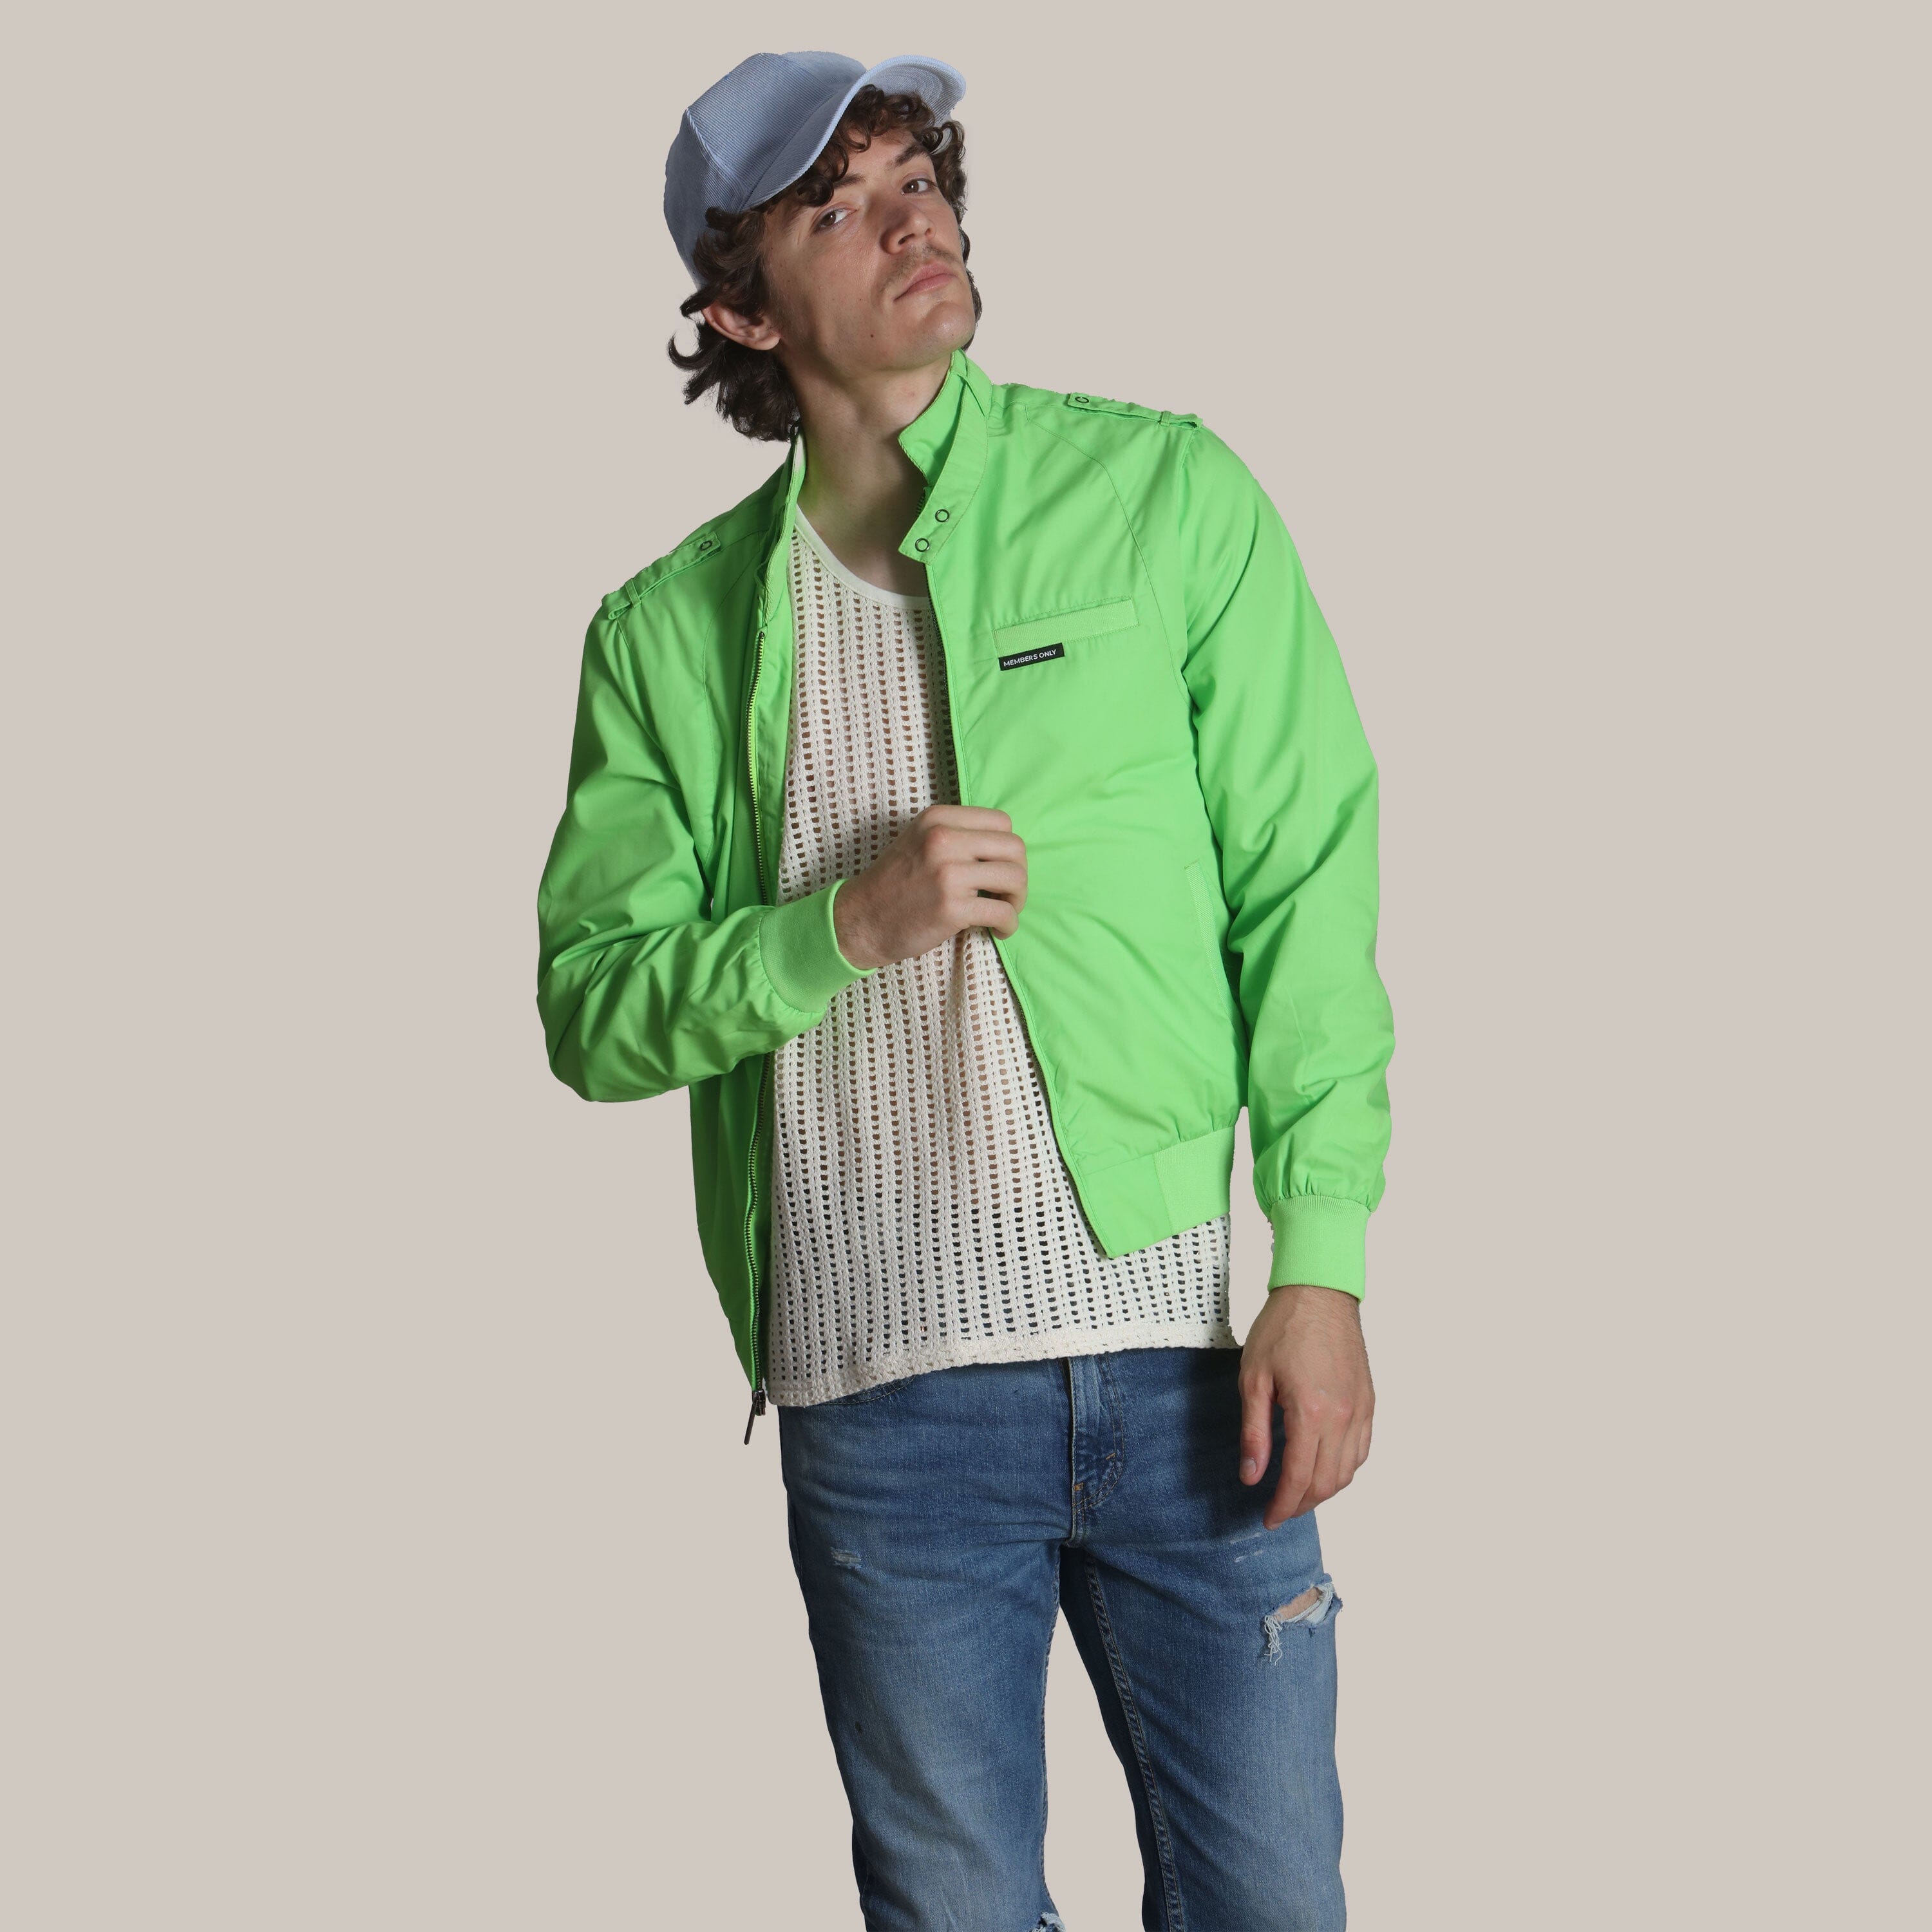 Men's Big & Tall Classic Iconic Racer Jacket Unisex Members Only 